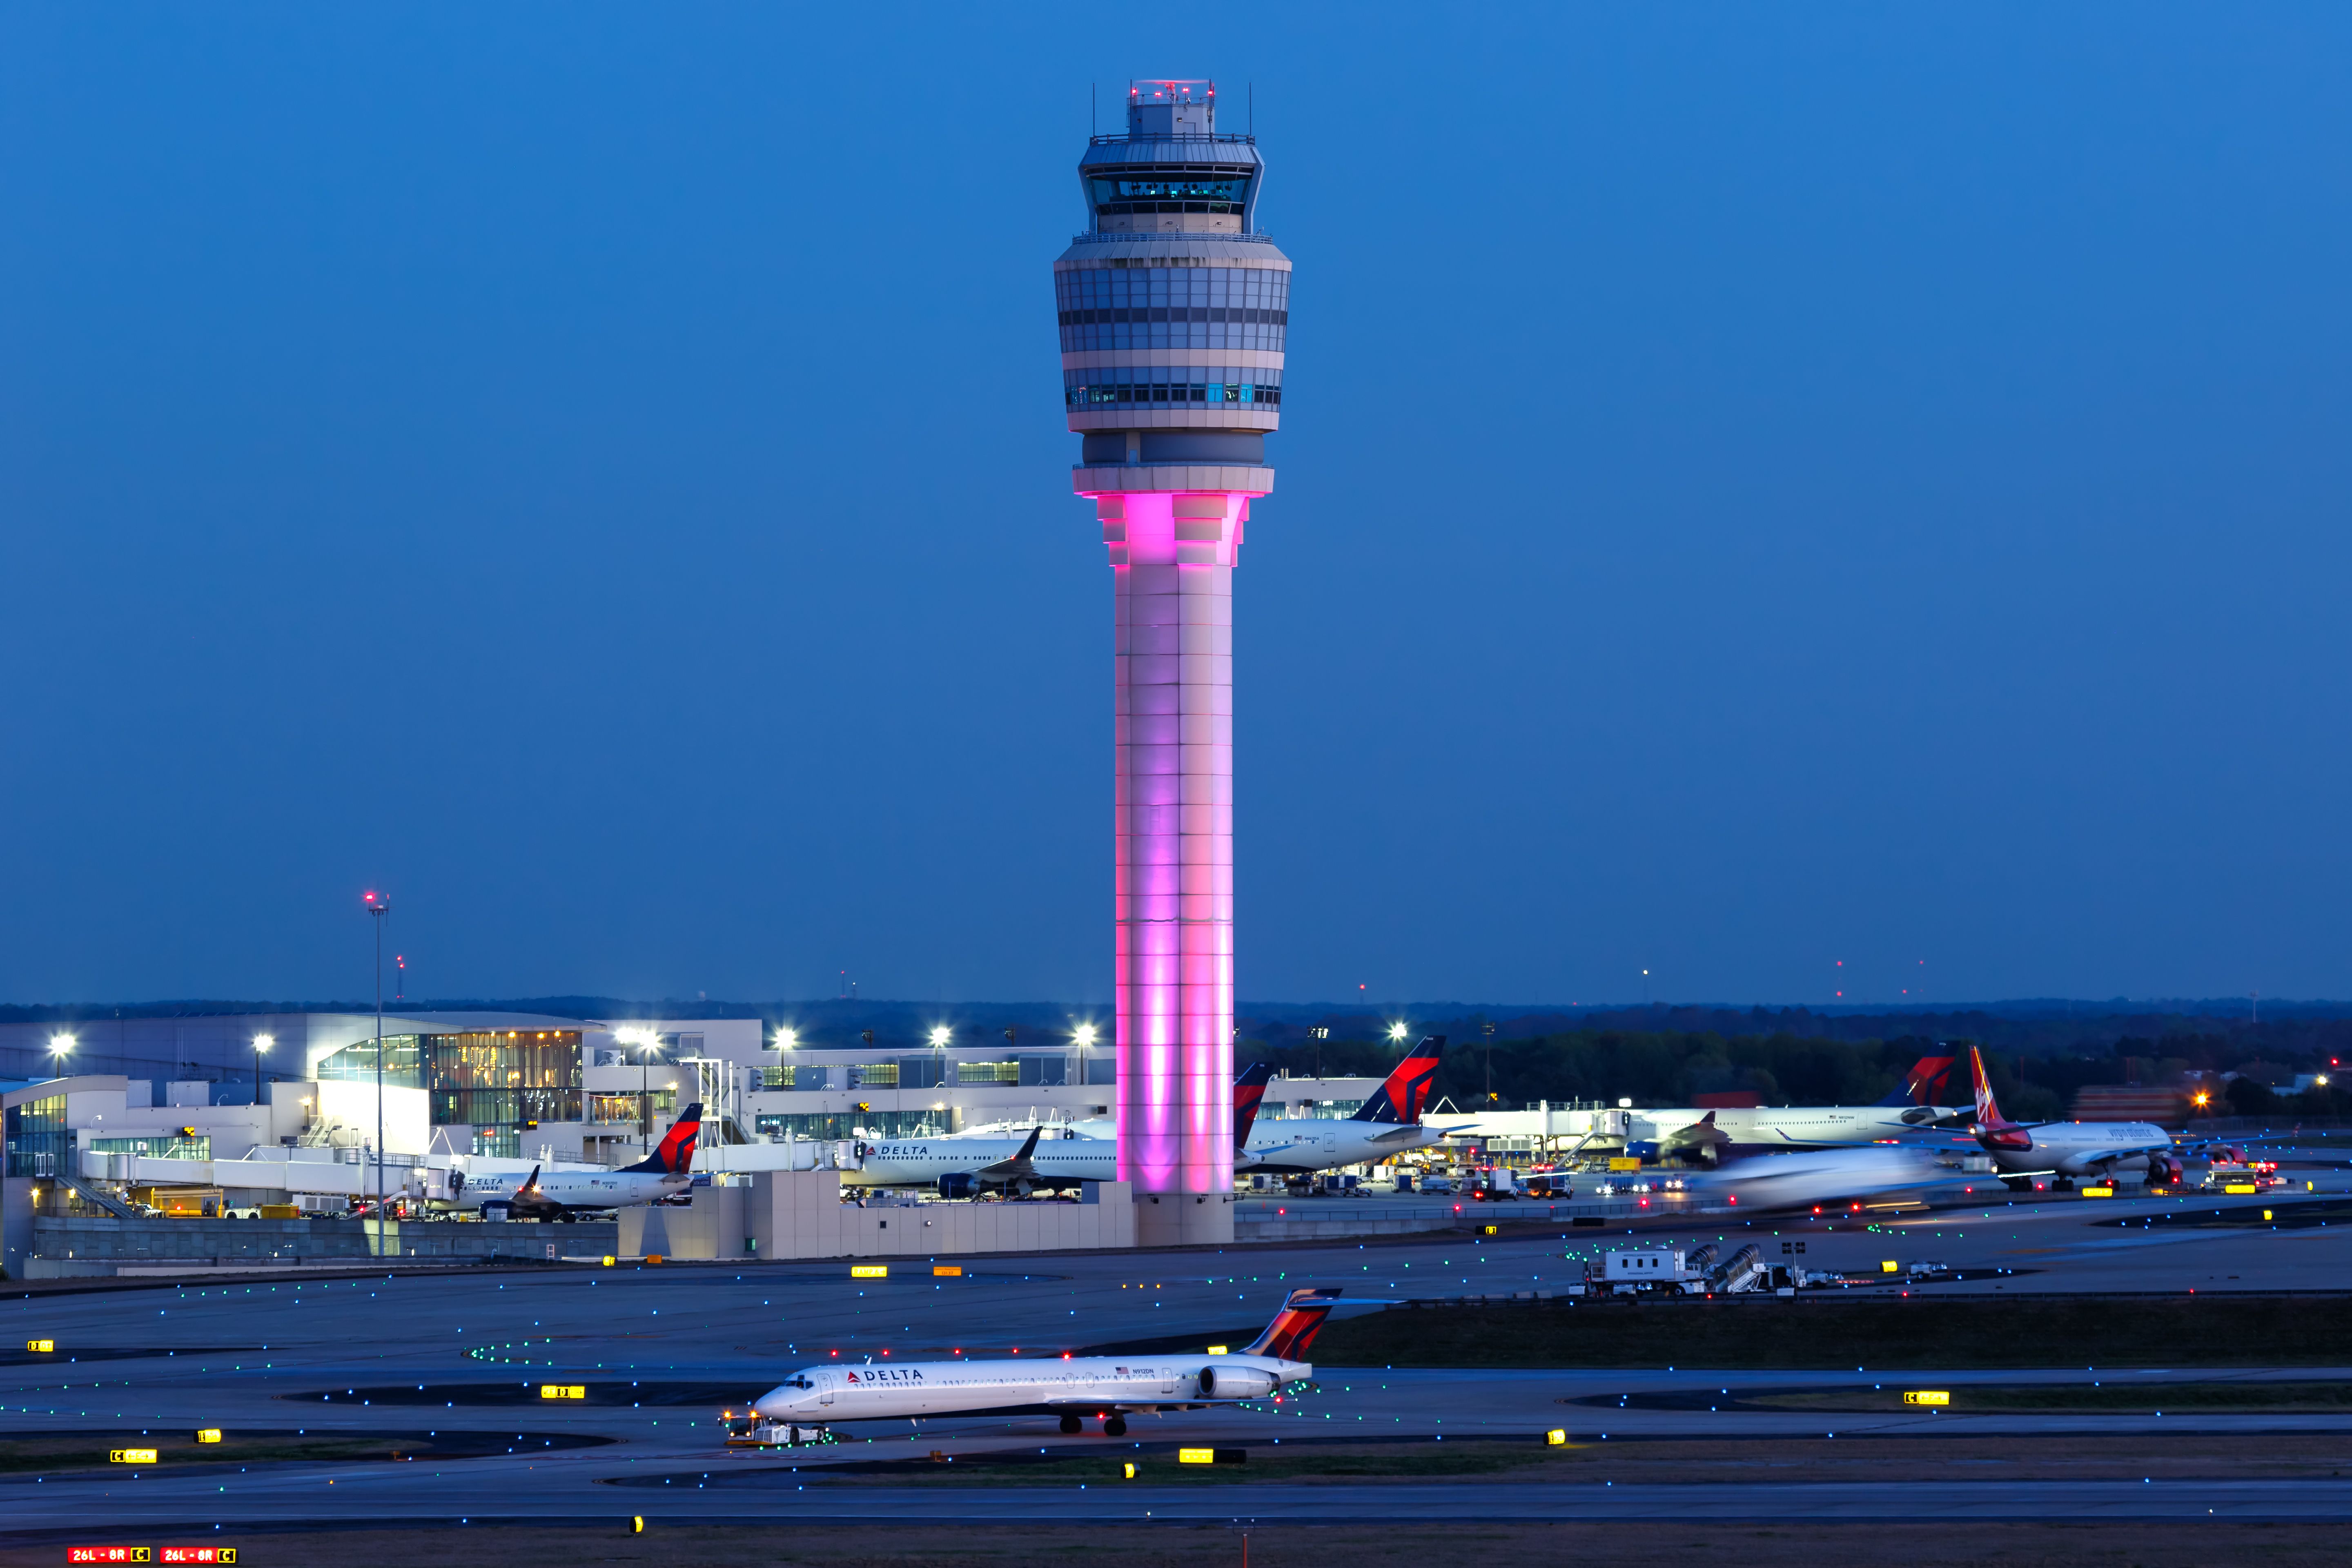 A view of Atlanta Hartfield Jackson Airport in the evening.